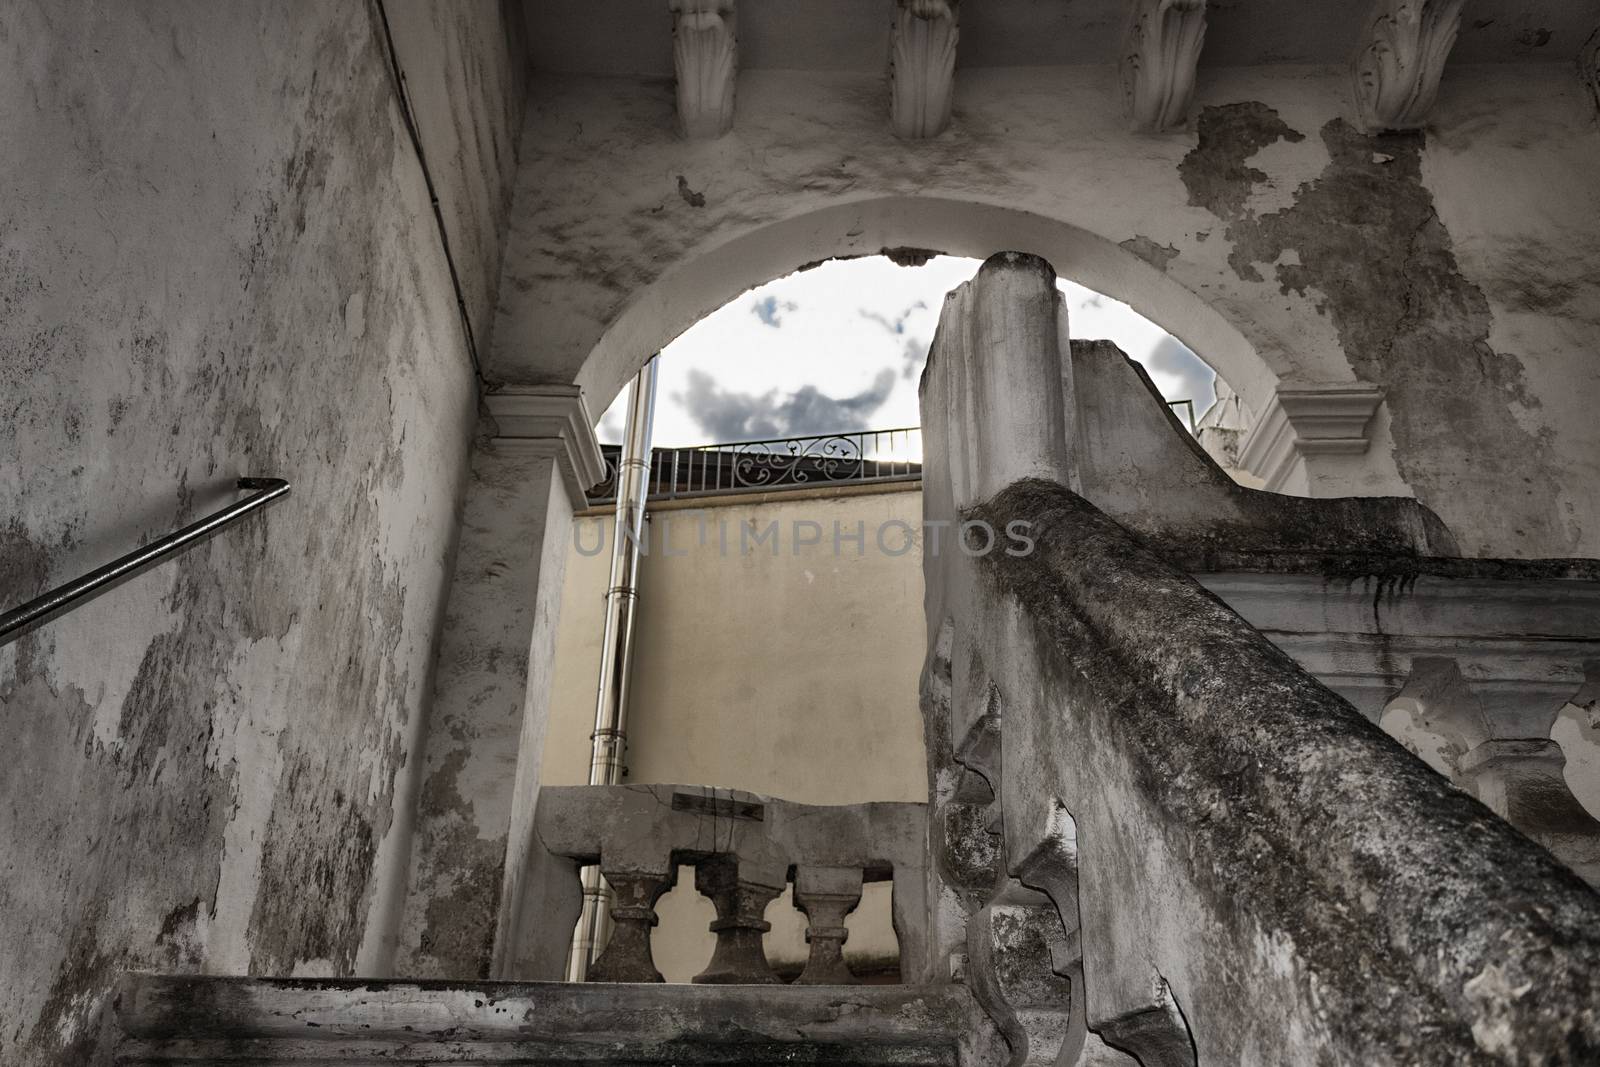 Arch and stairs to the roof of Doxi Stracca Fontana Palace about 1760 A.D. in the old town of Gallipoli (Le)) in the southern Italy